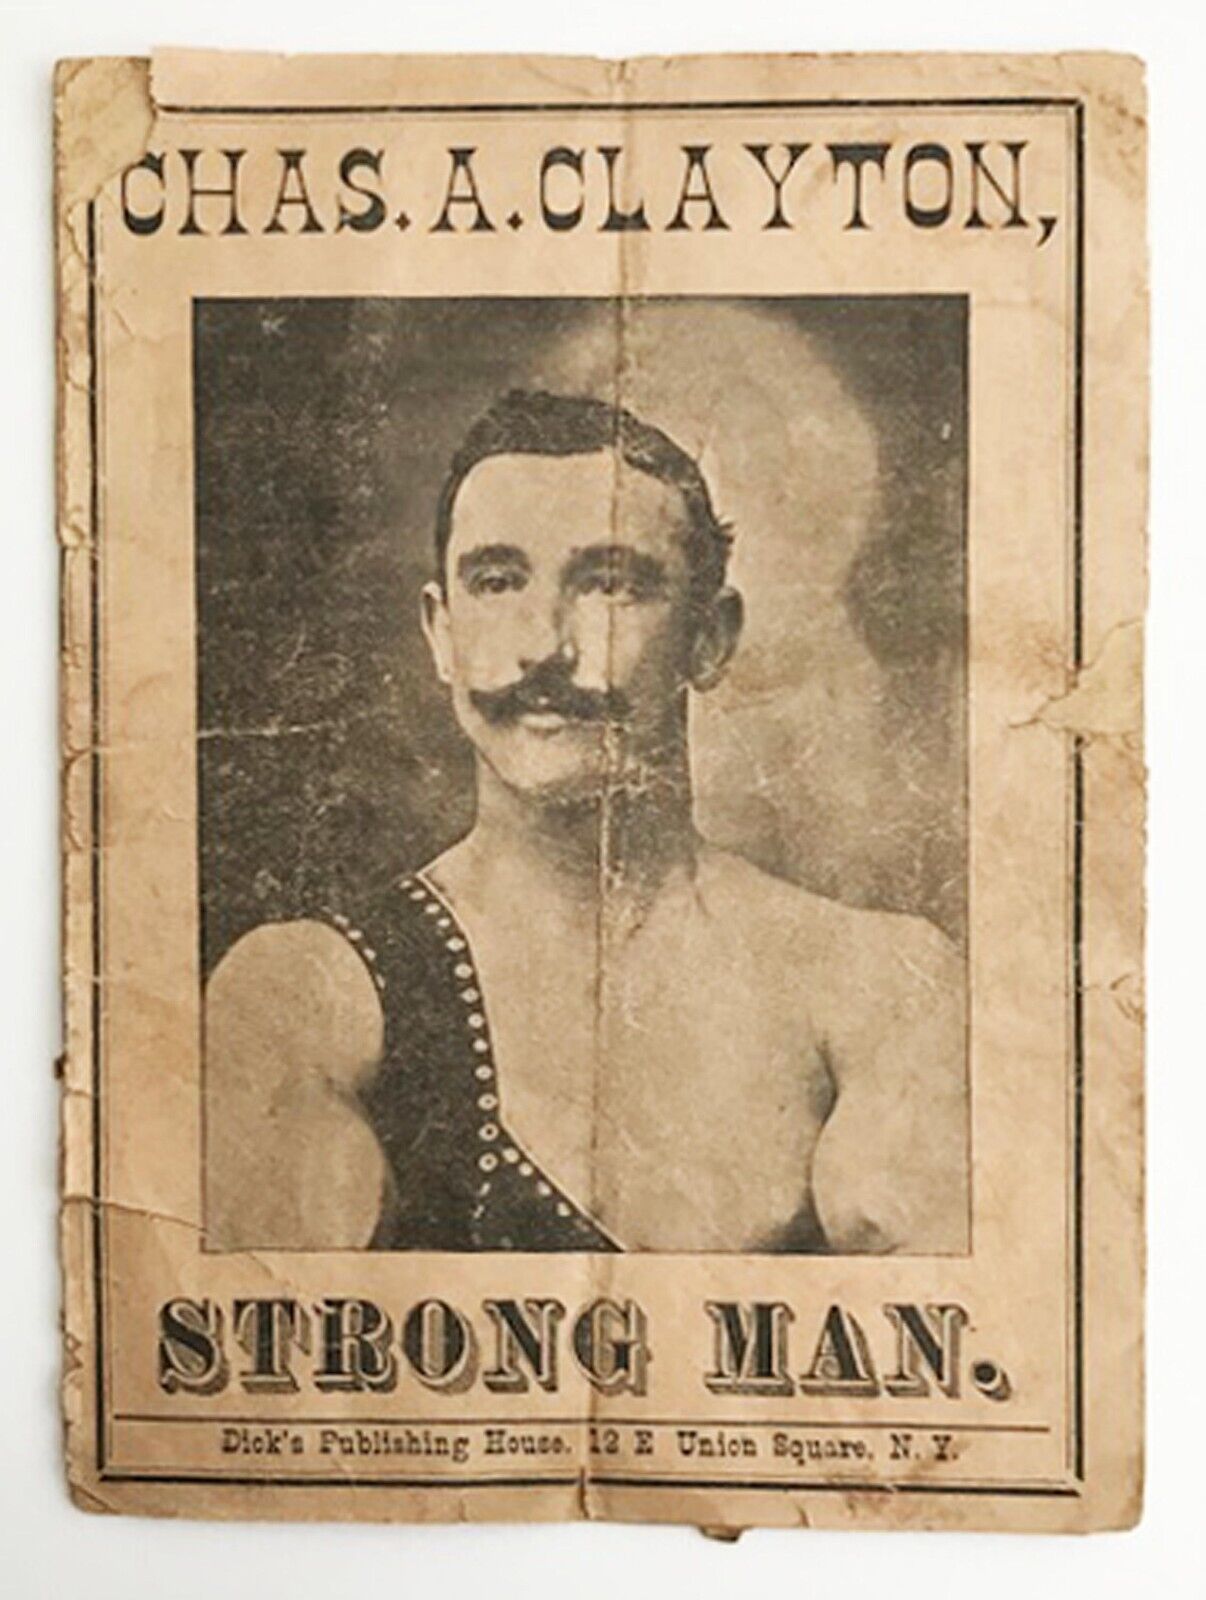 Antique Booklet CHAS. A. CLAYTON, STRONG MAN, Circus, Dick’s Publishing House, N